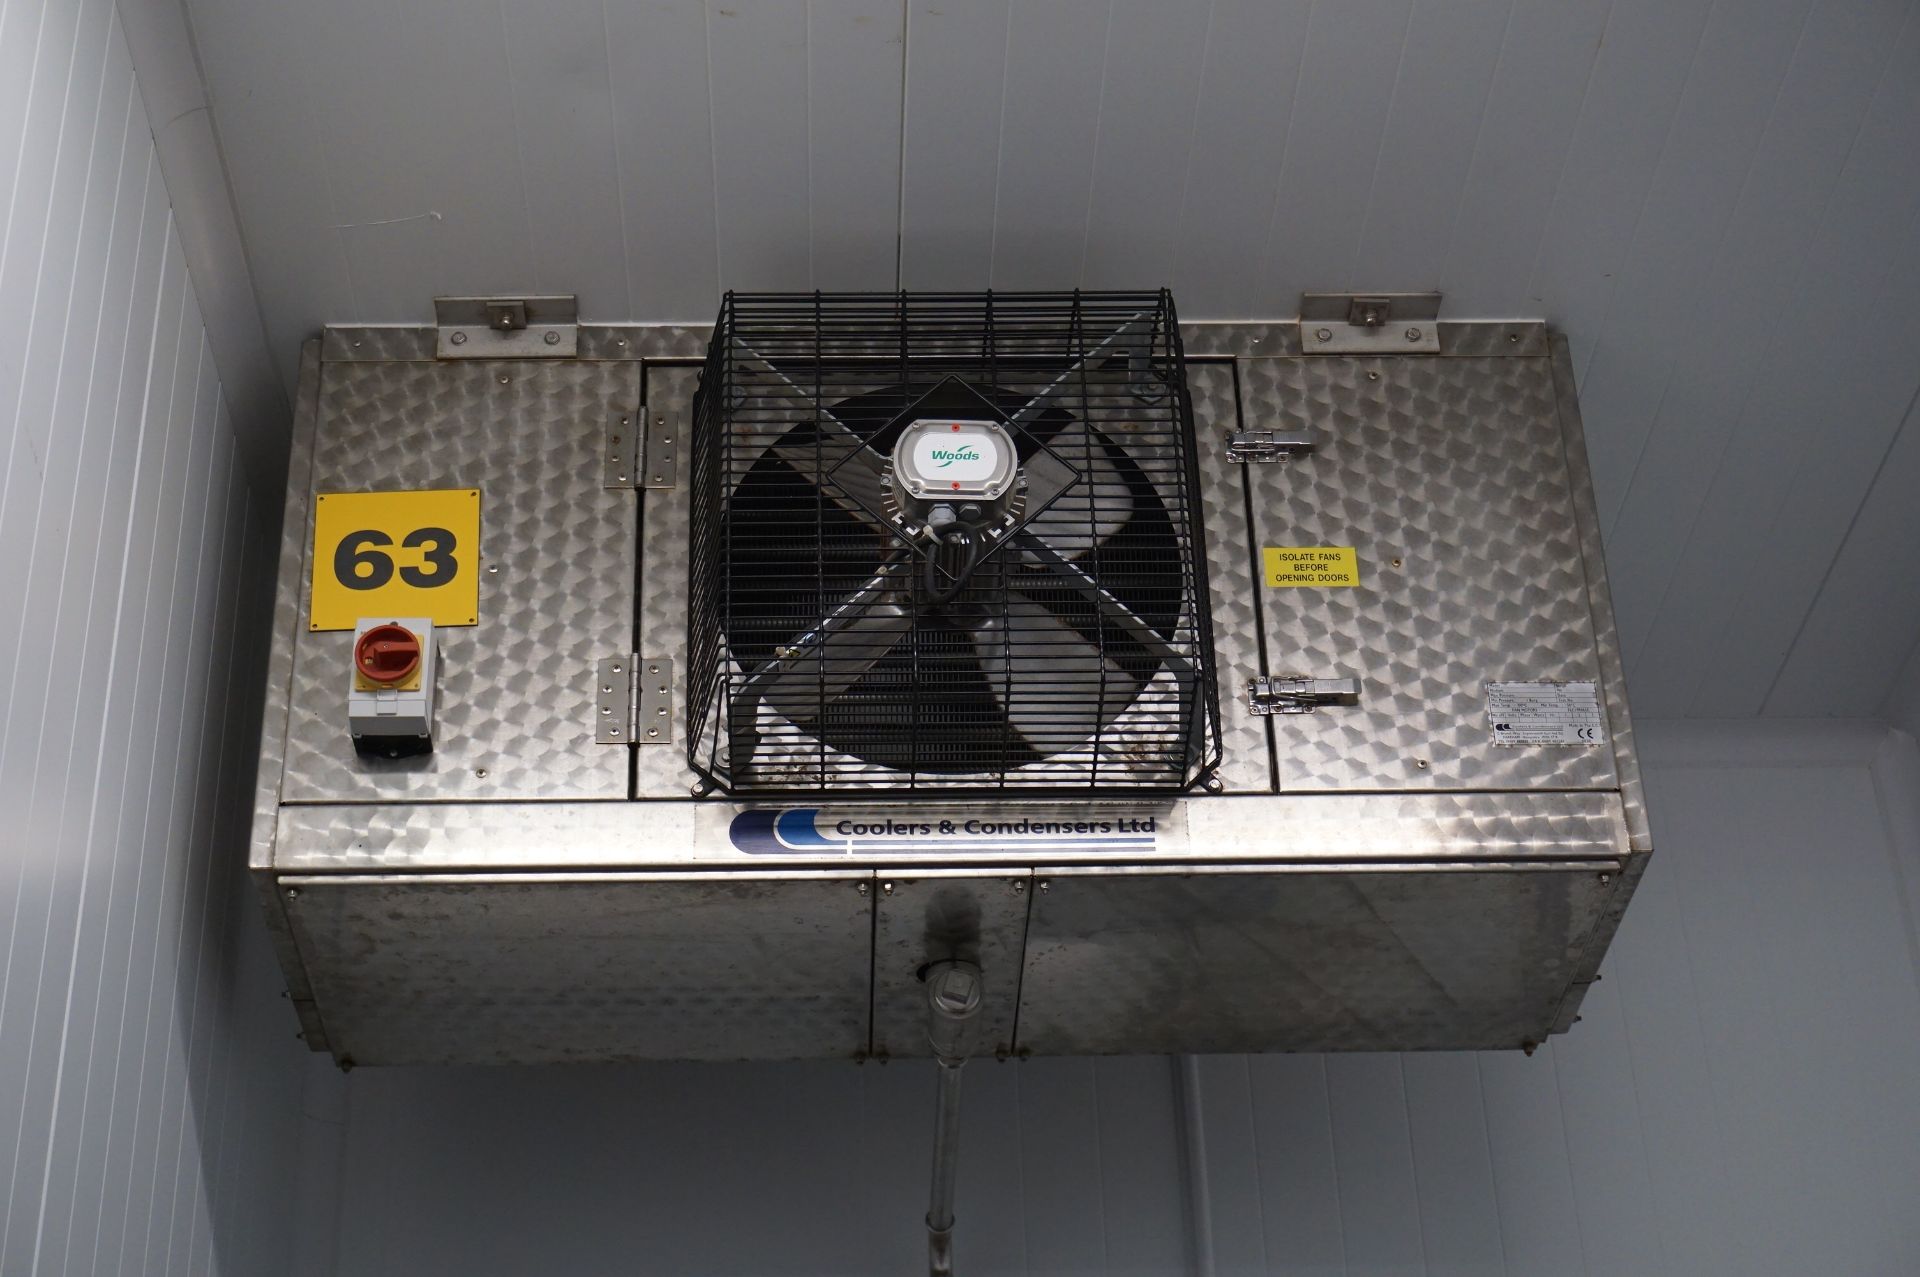 Coolers & Condensers, stainless steel single fan chiller unit (2005) Max: 100'c Min: -50'c (Lift out